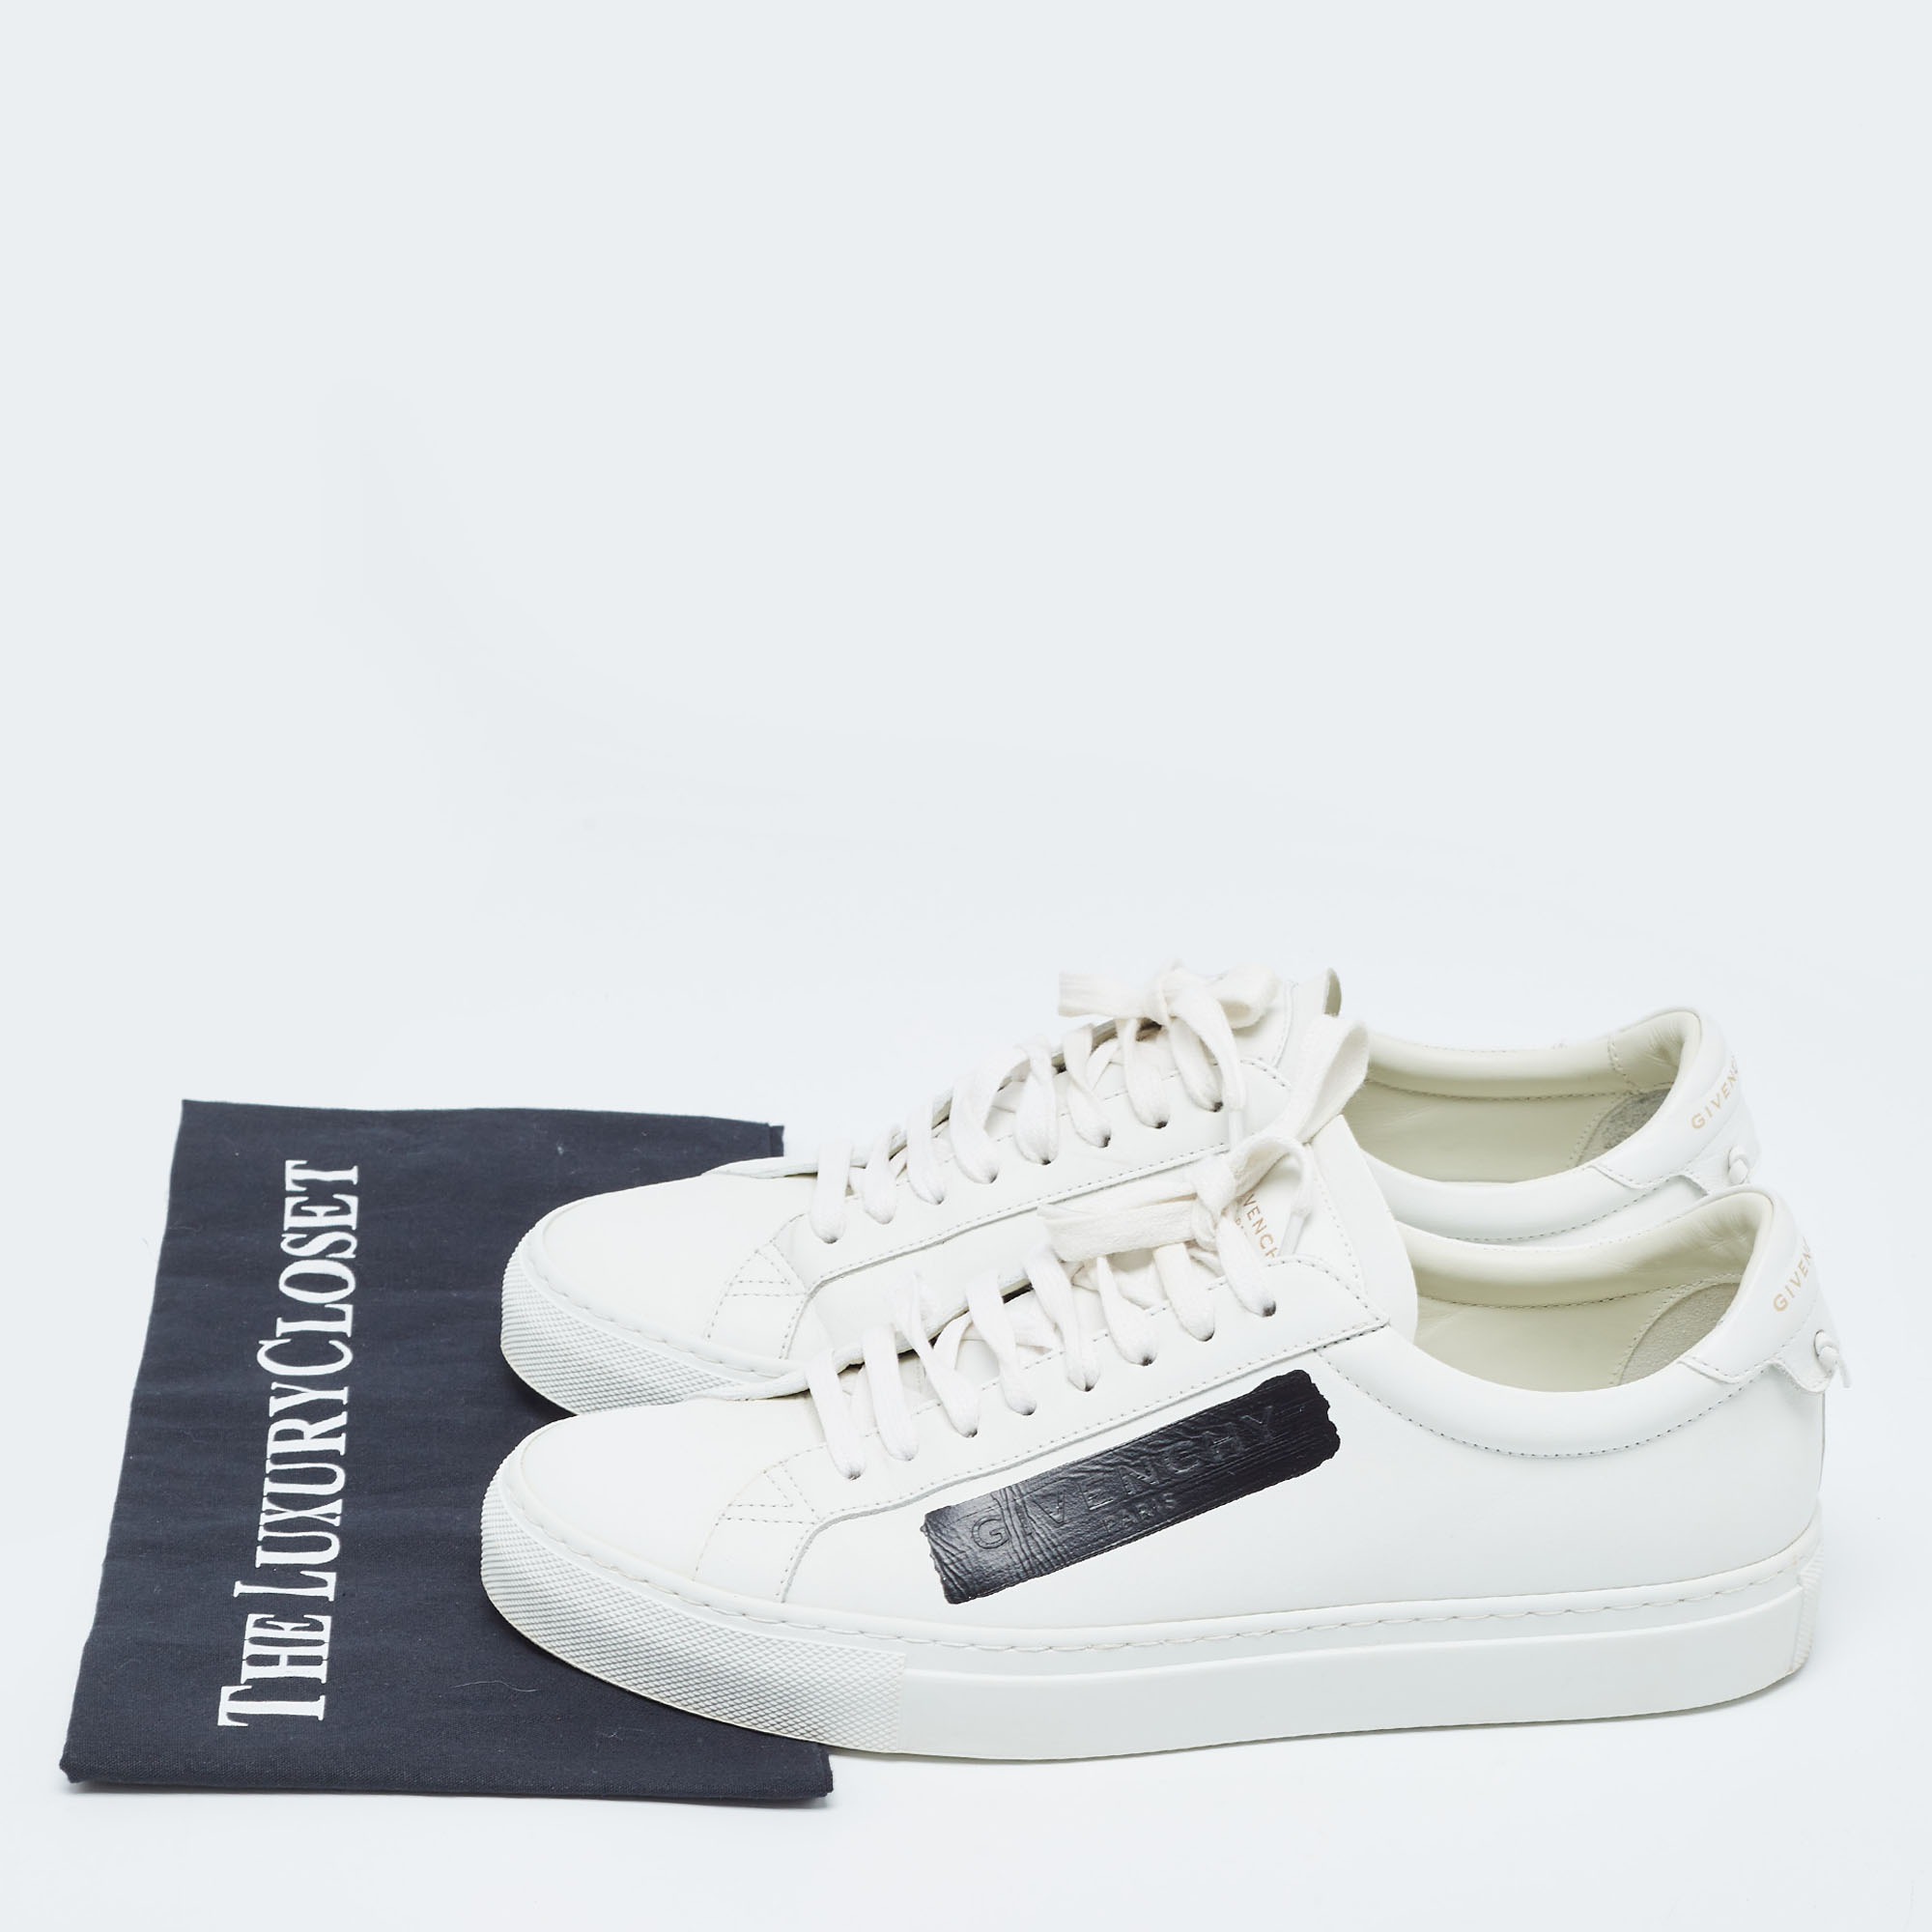 Givenchy White Leather Low Top Sneakers Size 40